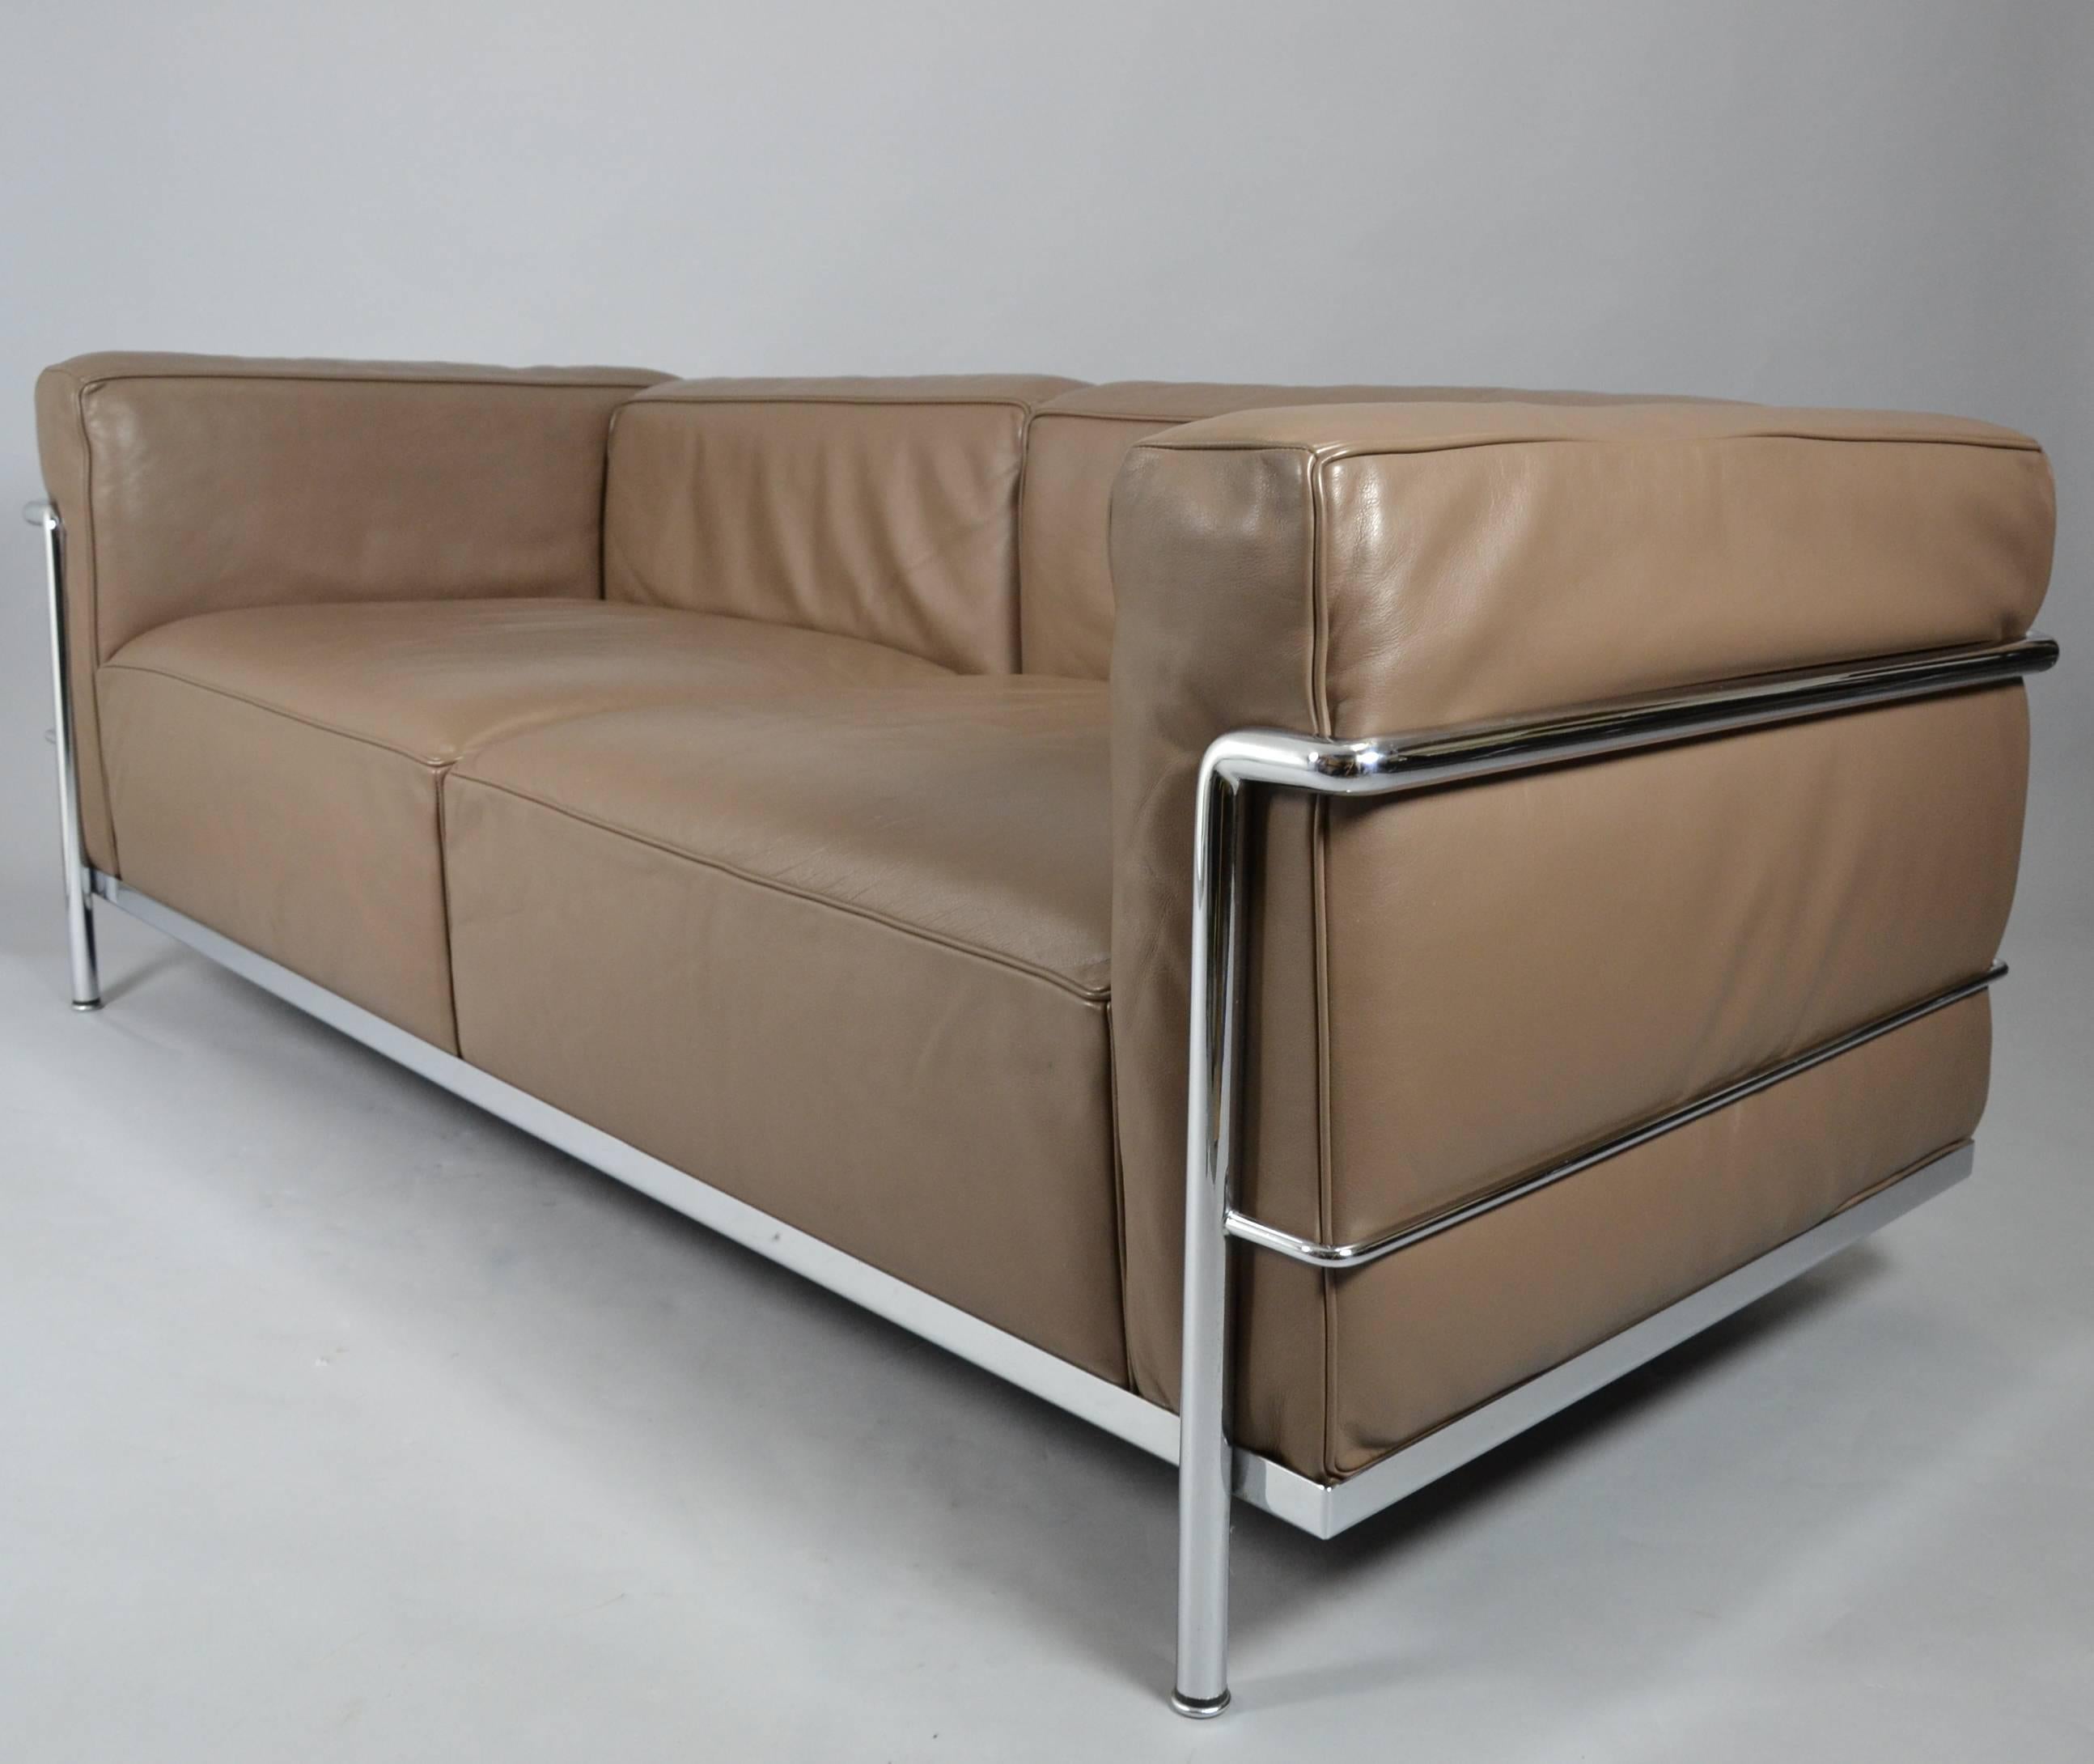 Designed by Le Corbusier, Pierre Jeanneret and Charlotte Perriand in 1928. Produced and signed by Cassina.
Stainless steel with cushions in light brown leather.